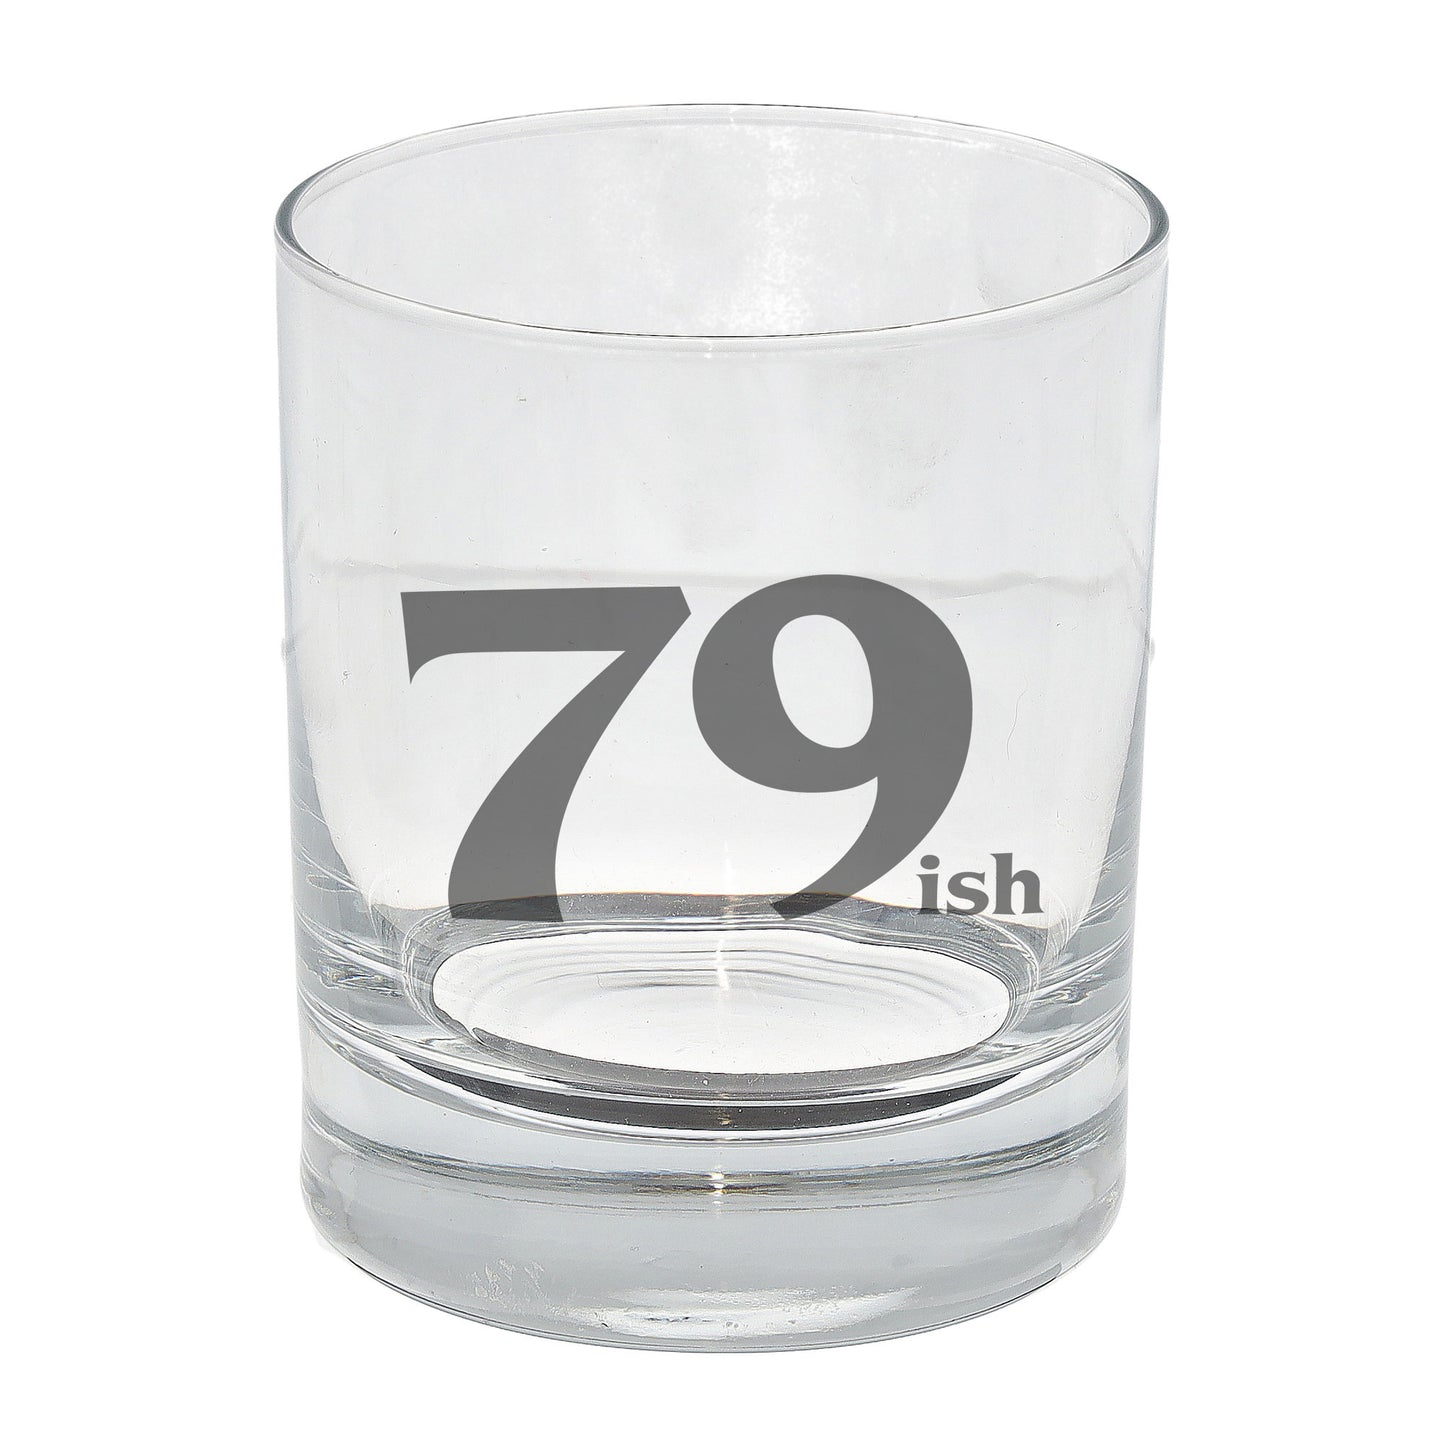 79ish Whisky Glass and/or Coaster Set  - Always Looking Good - Whisky Glass On Its Own  